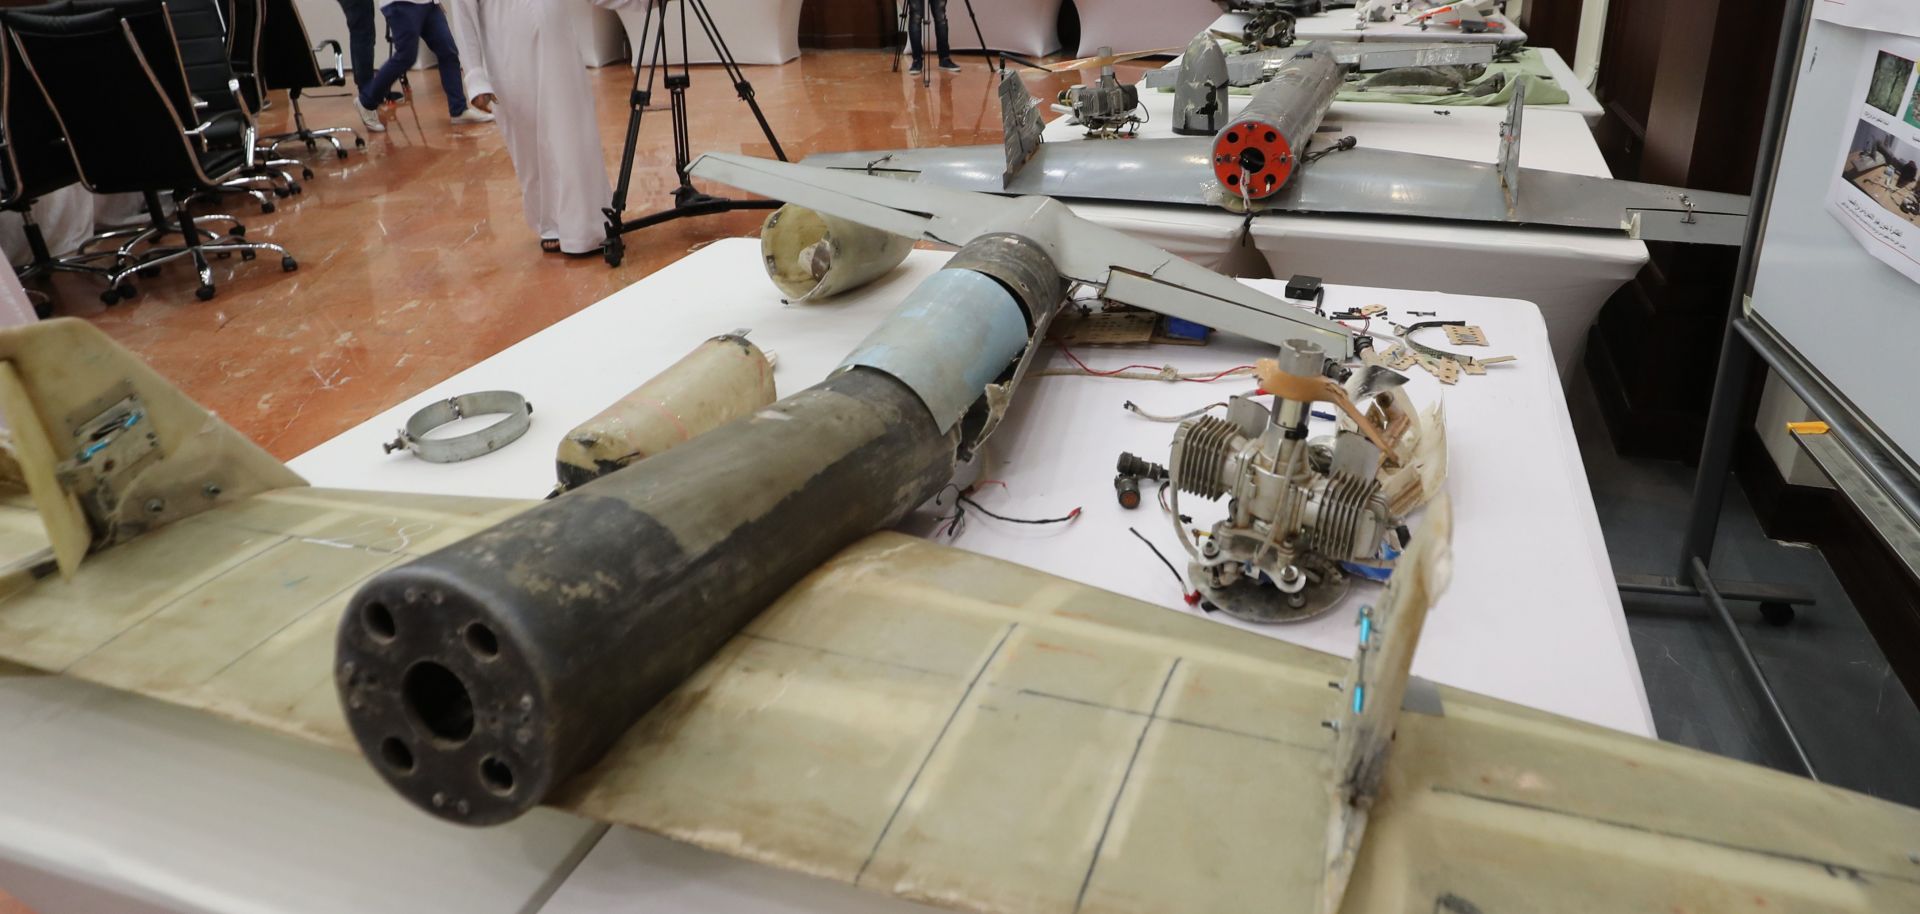 This photo shows remains of drones alleged to have been used by Houthi rebels in Yemen